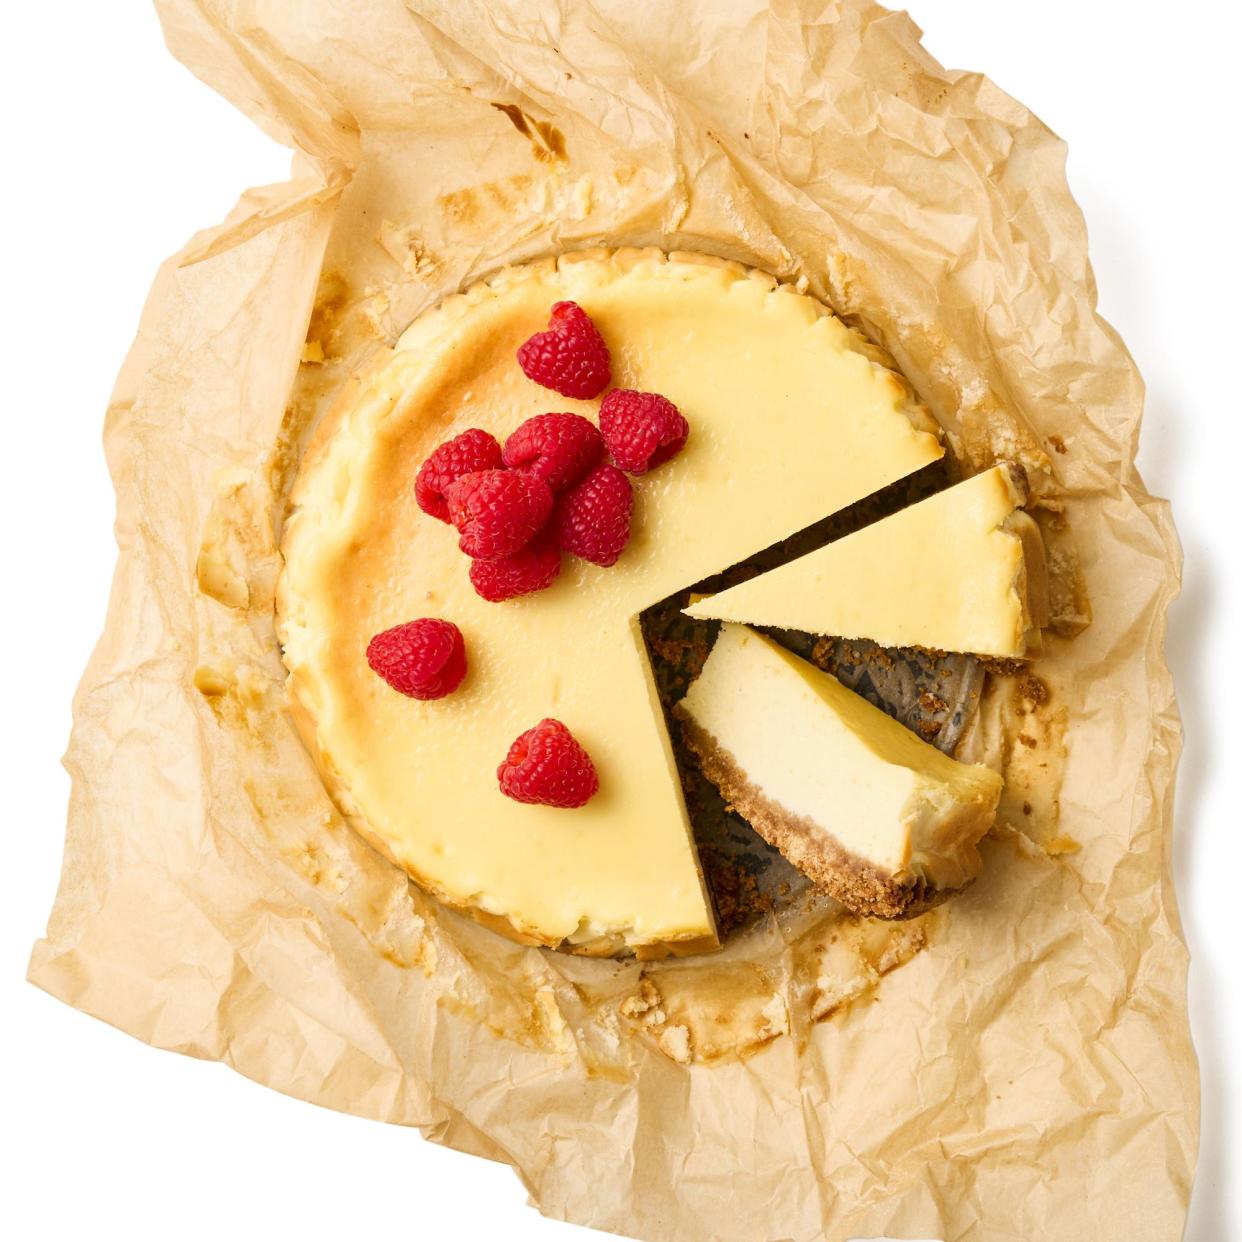 <span>Felicity Cloake’s baked American cheesecake: perfect for pairing with seasonal berries.</span><span>Photograph: The Guardian. Food styling: Loïc Parisot.</span>